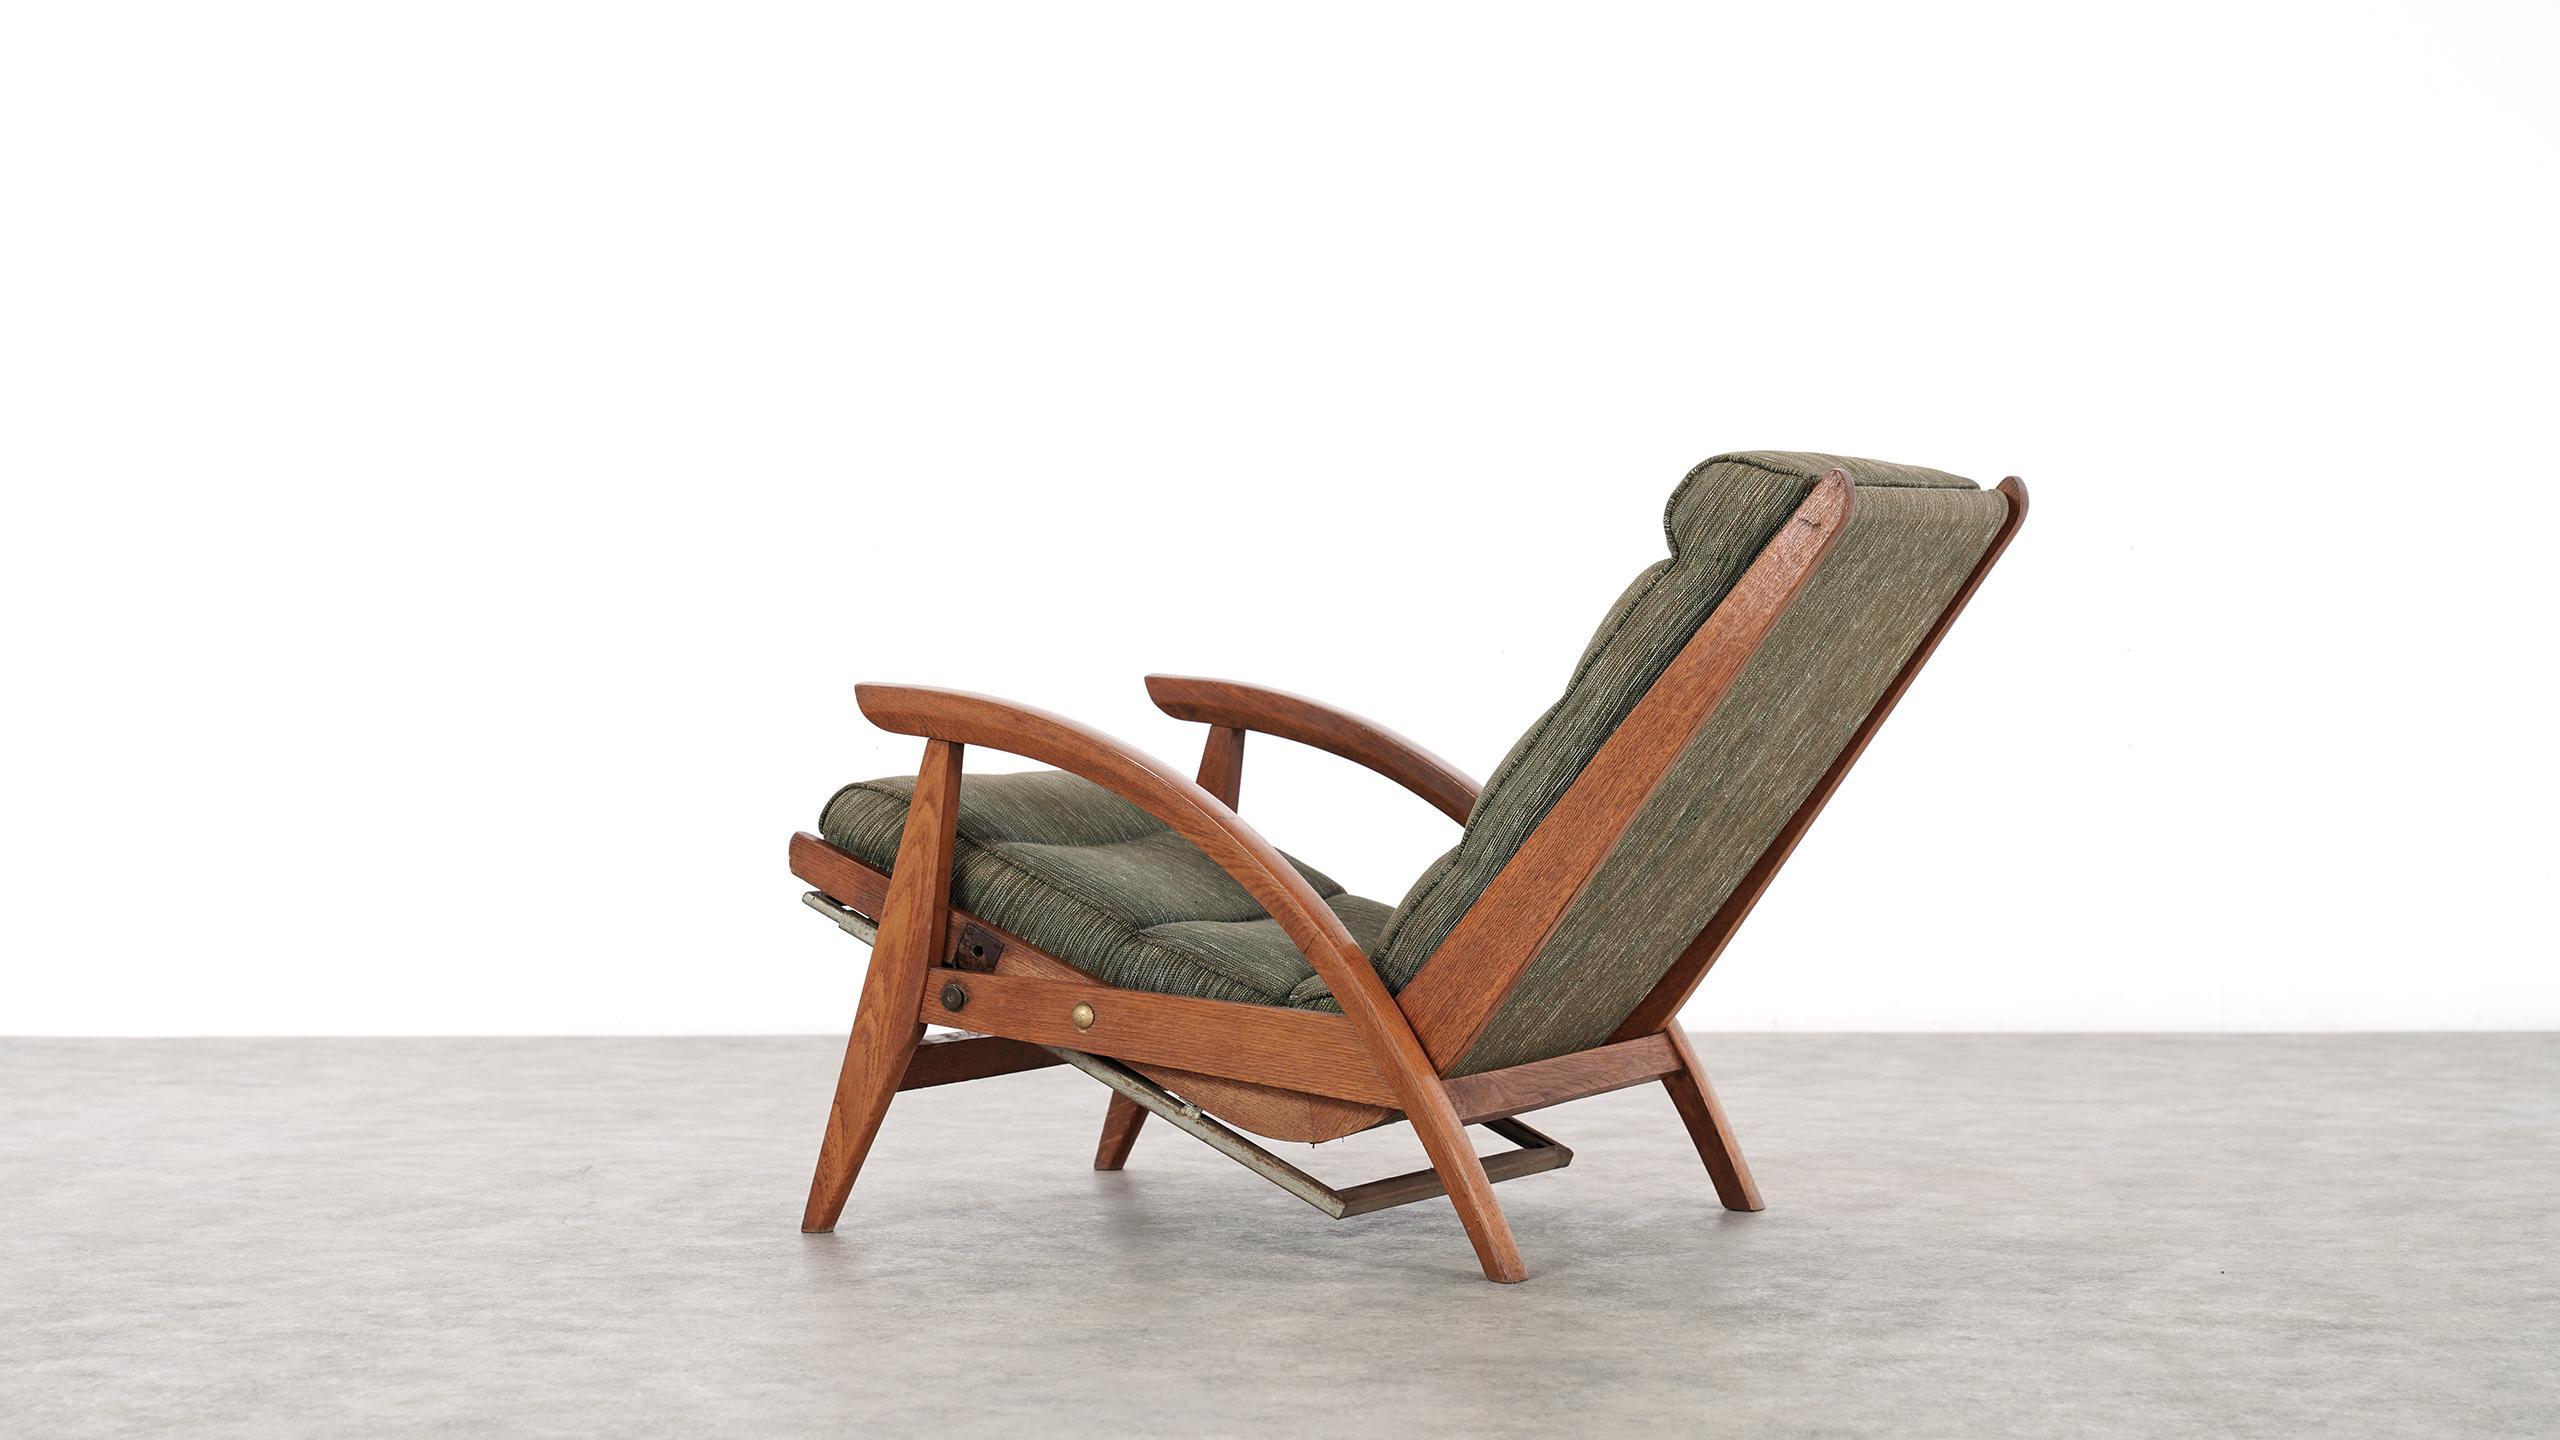 Guy Besnard FS 134 Reclining Lounge Chair, 1954 for Free Span, France Prouvé 11